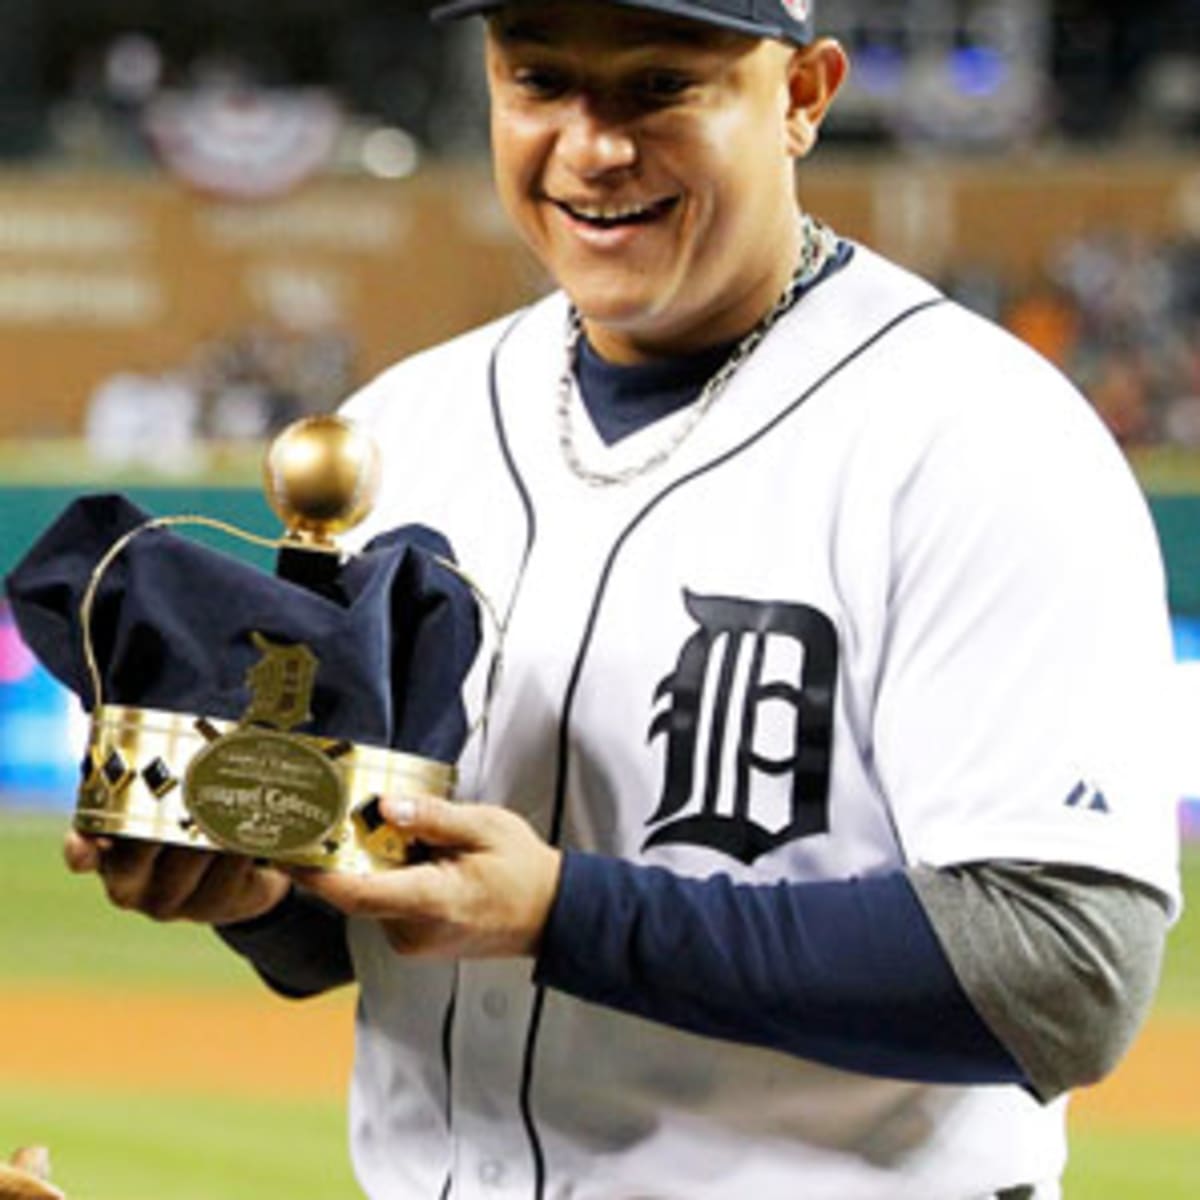 TRIPLE CROWN! The BEST from Miguel Cabrera's historic 2012 season! 